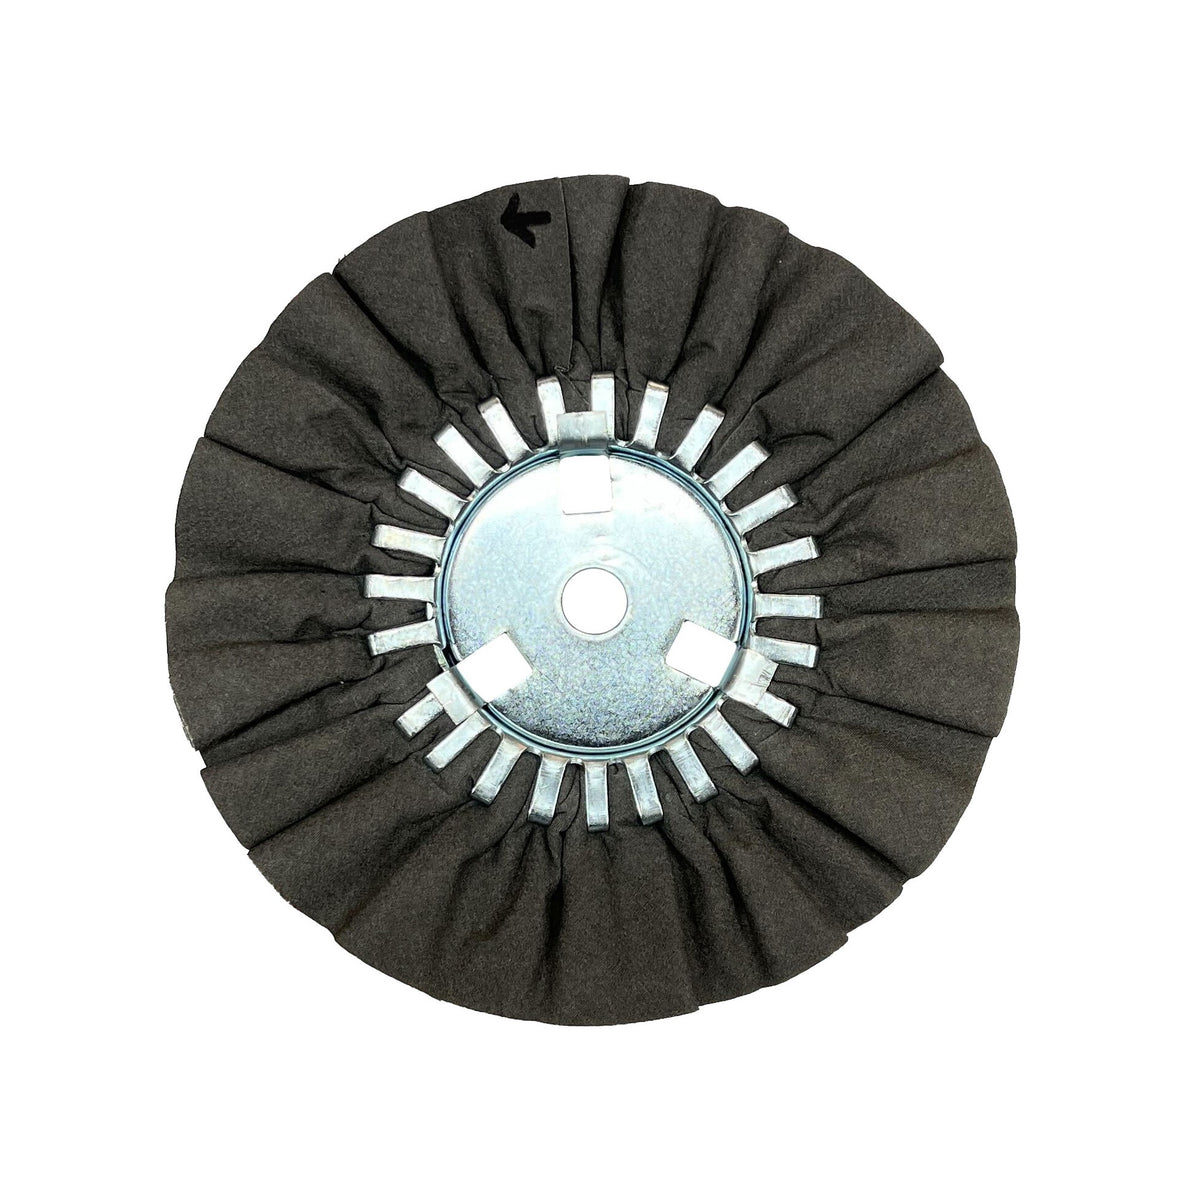 CLOSEOUT: Airway Buffing Wheels